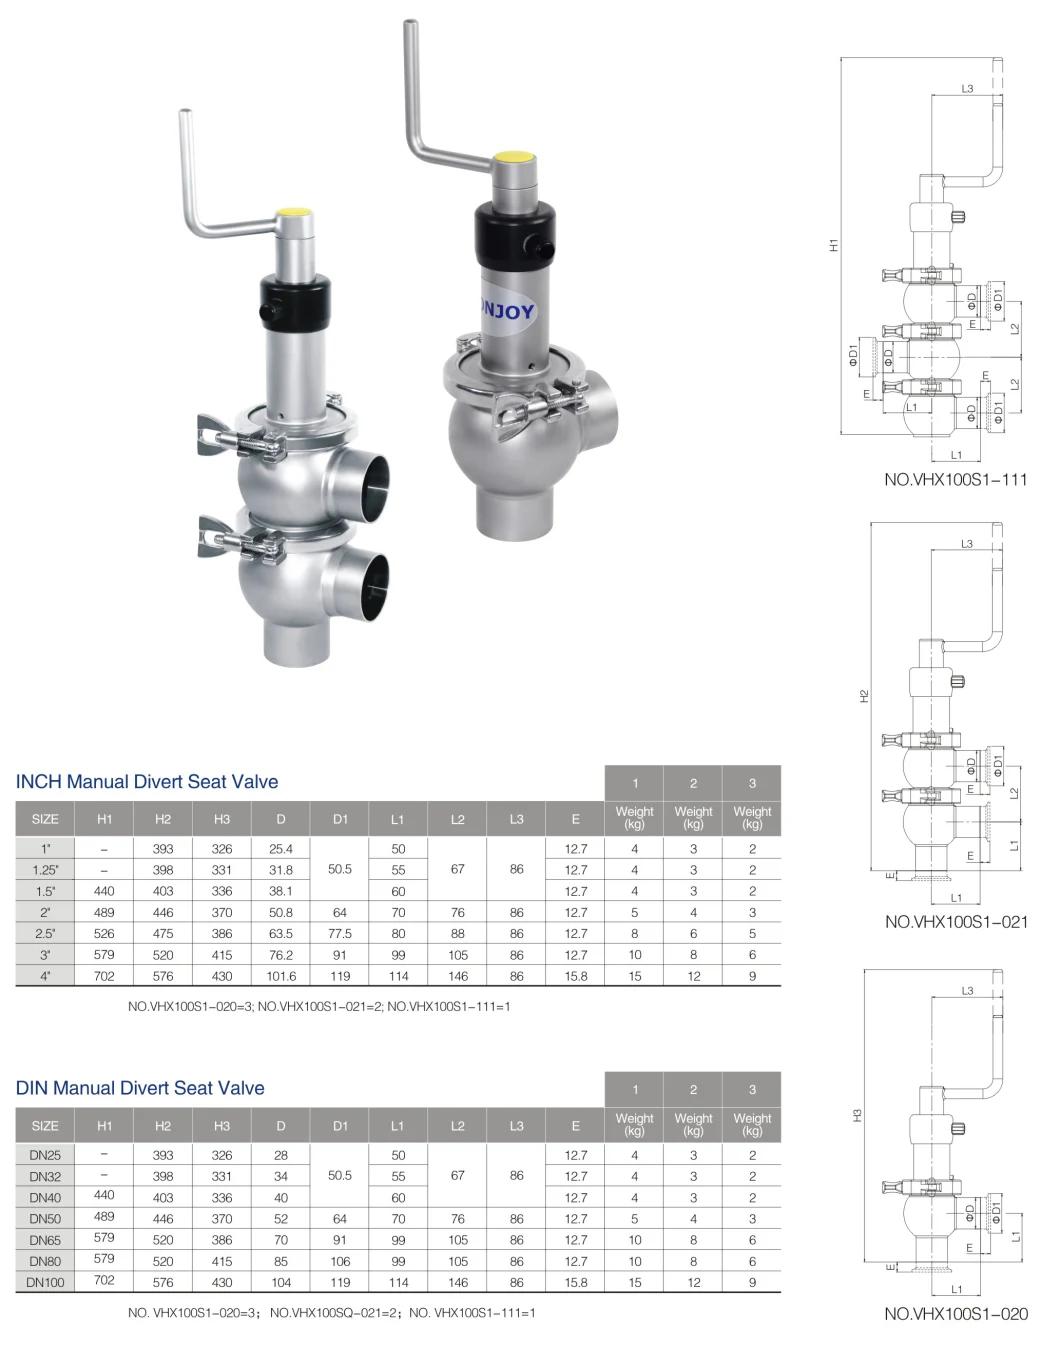 3A Certified Sanitary Tri Clover Shut-off and Diverter Valve